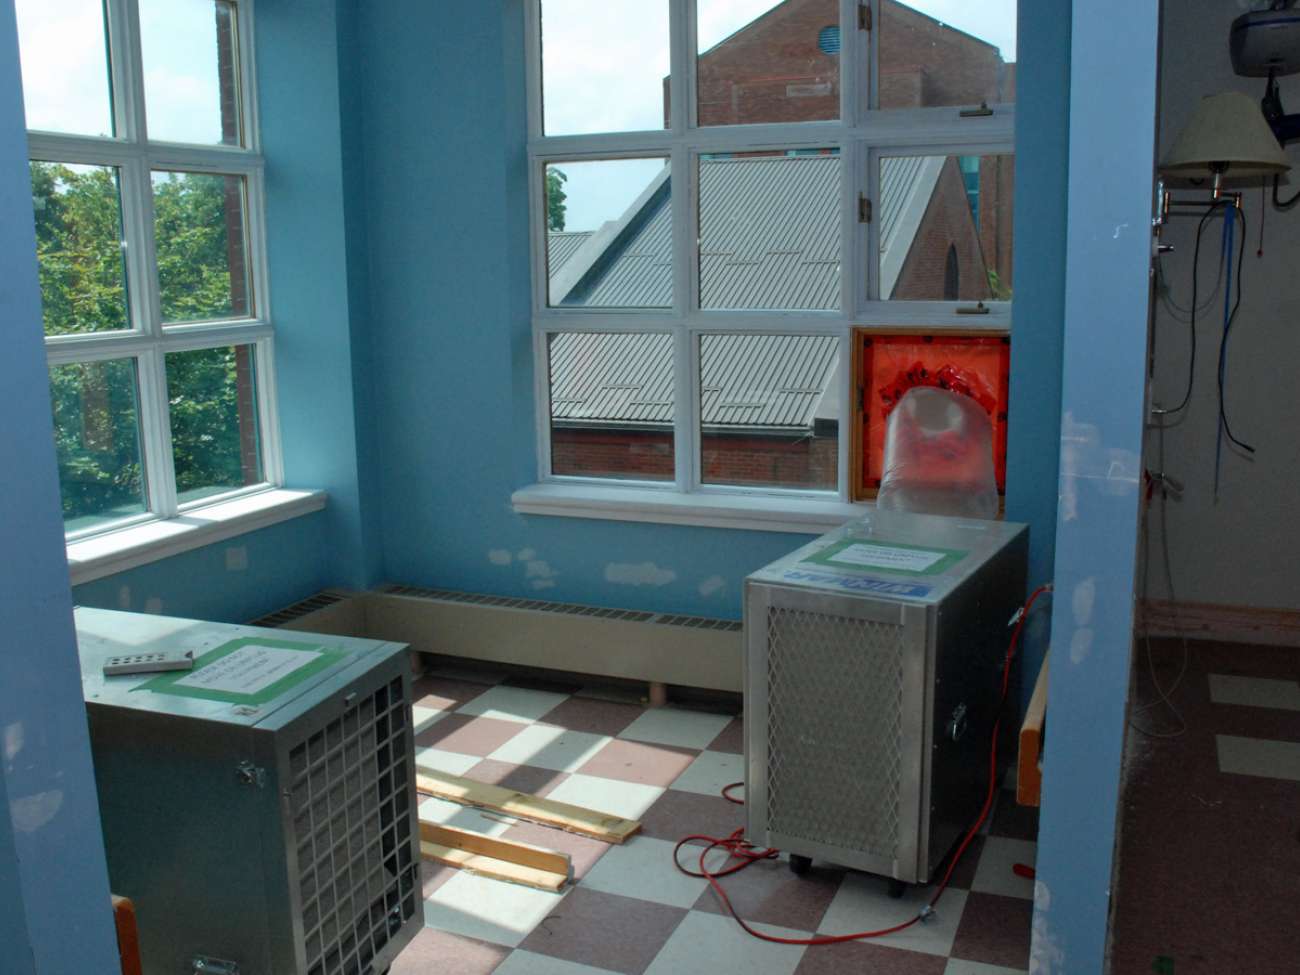 Air handling units help to keep construction dust out of the hospital.